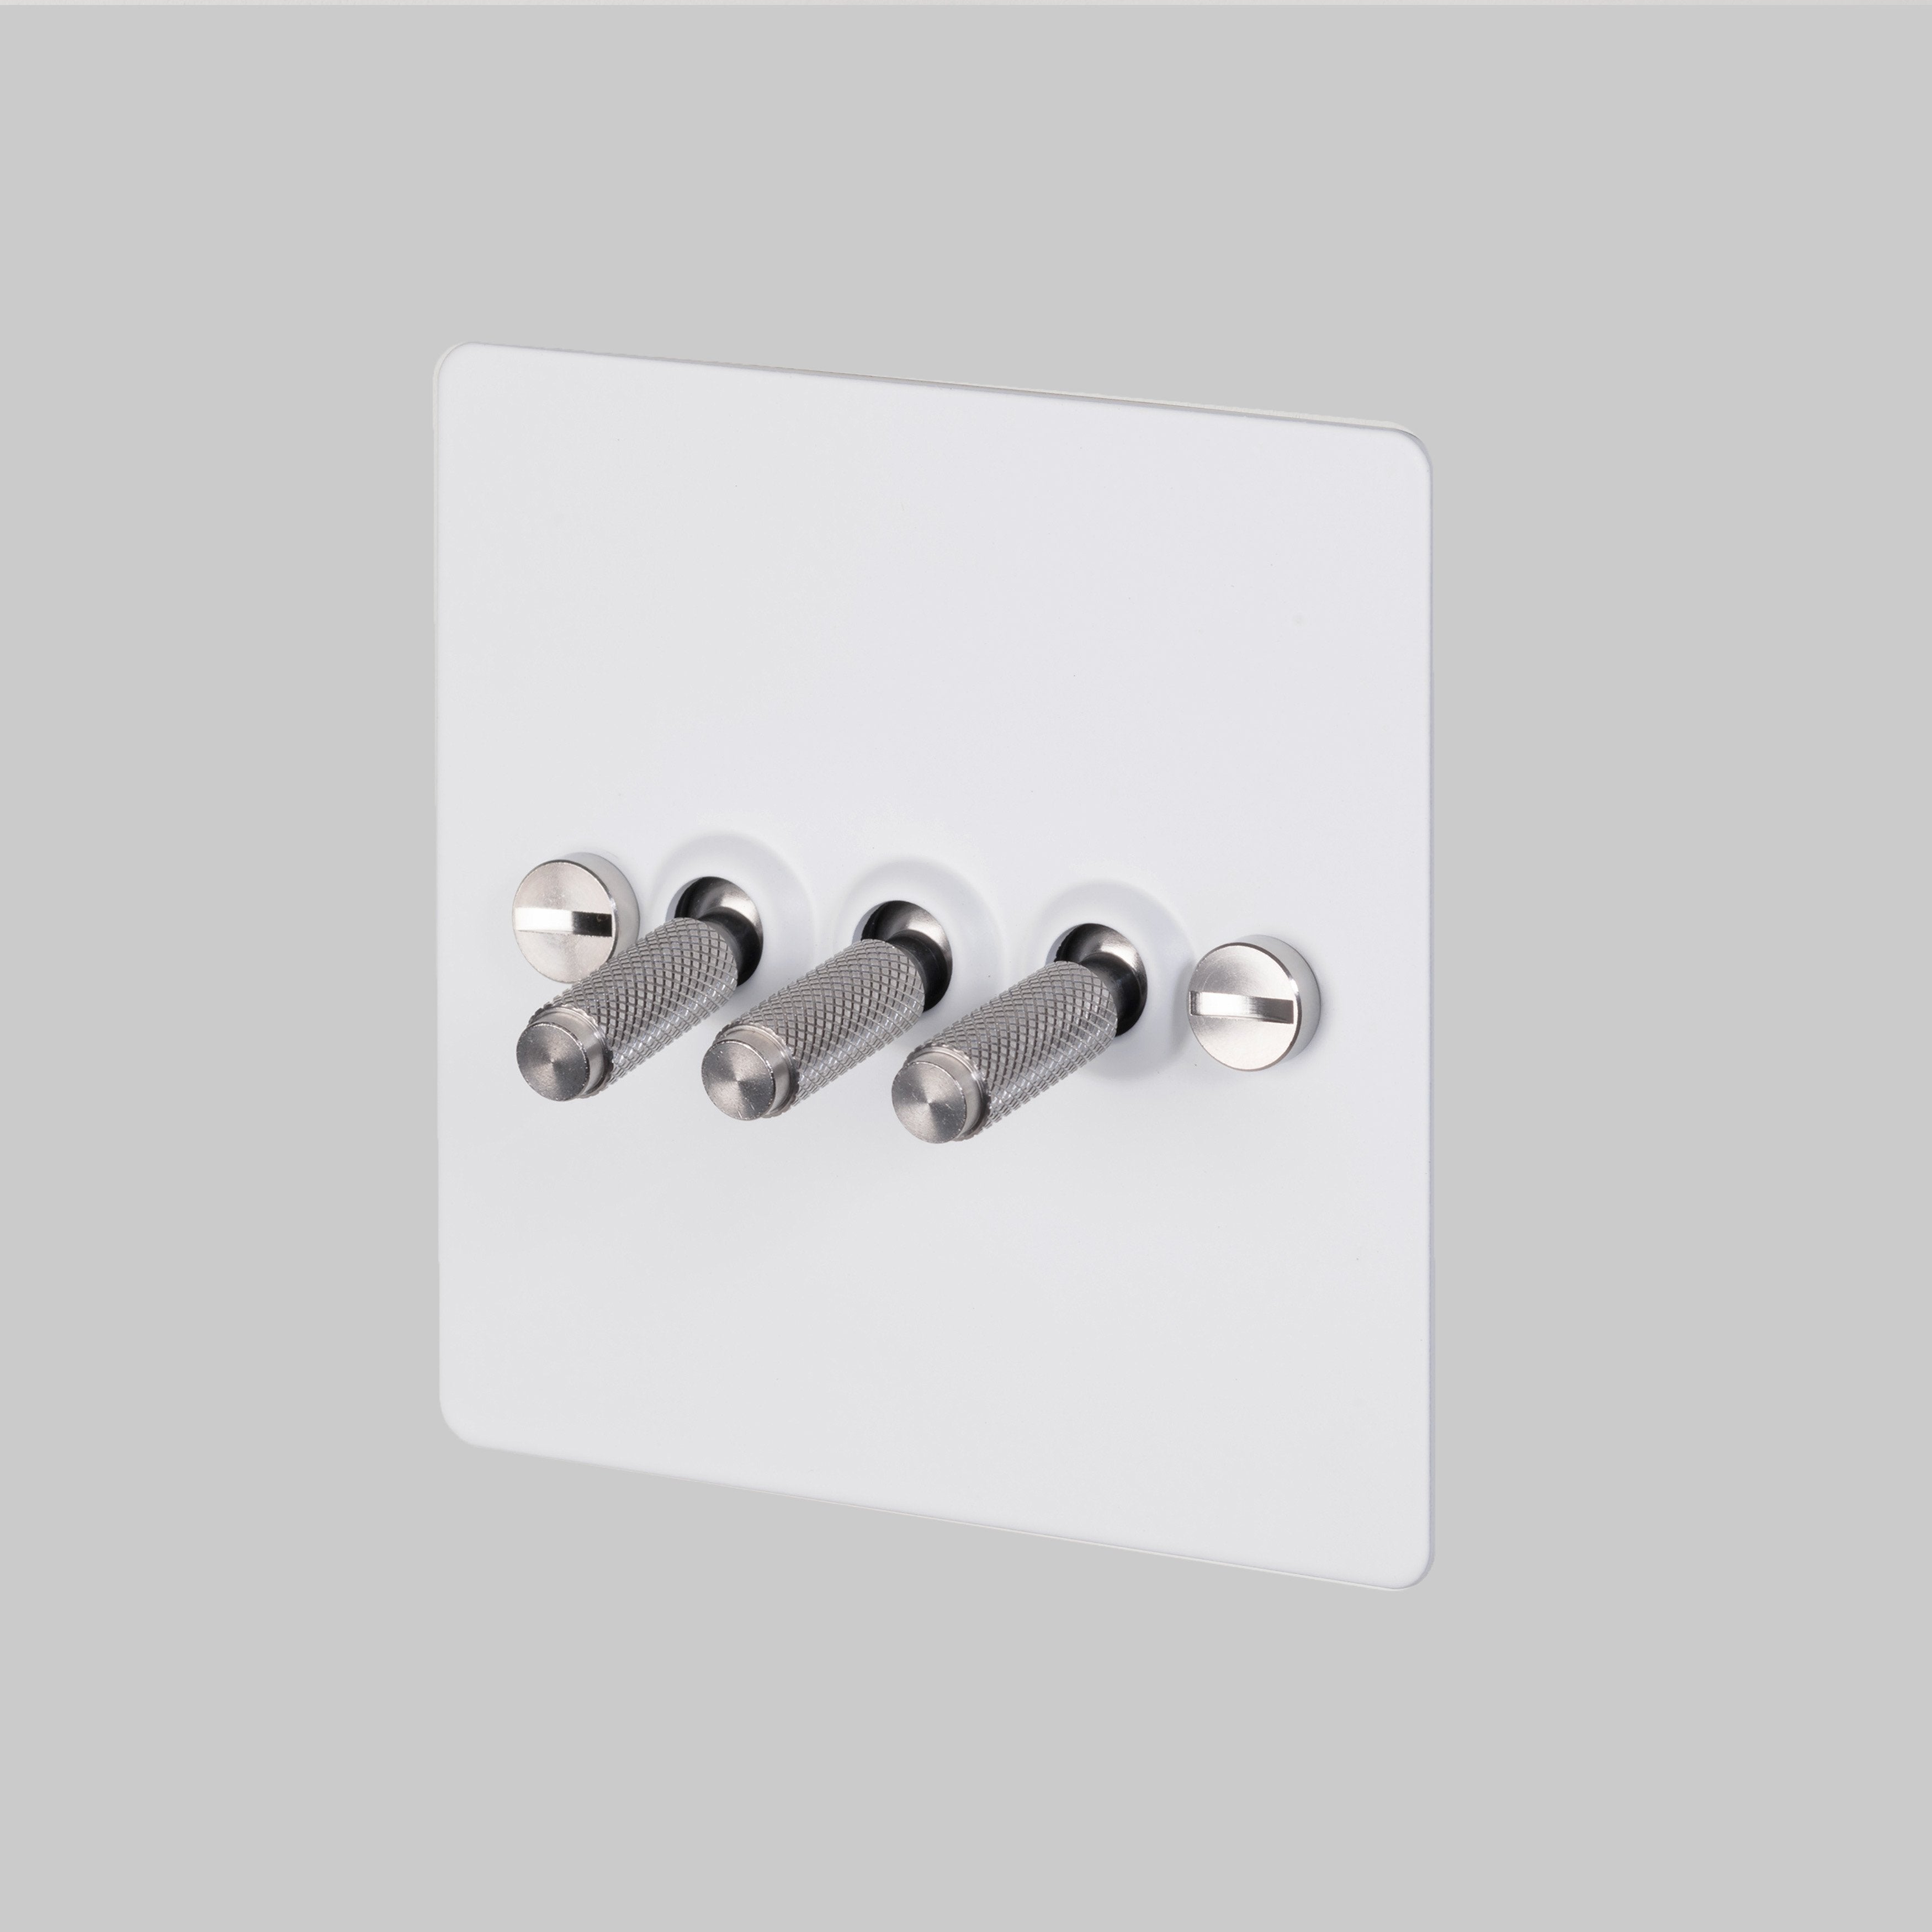 Buster and Punch 3G TOGGLE SWITCH / WHITE / STEEL